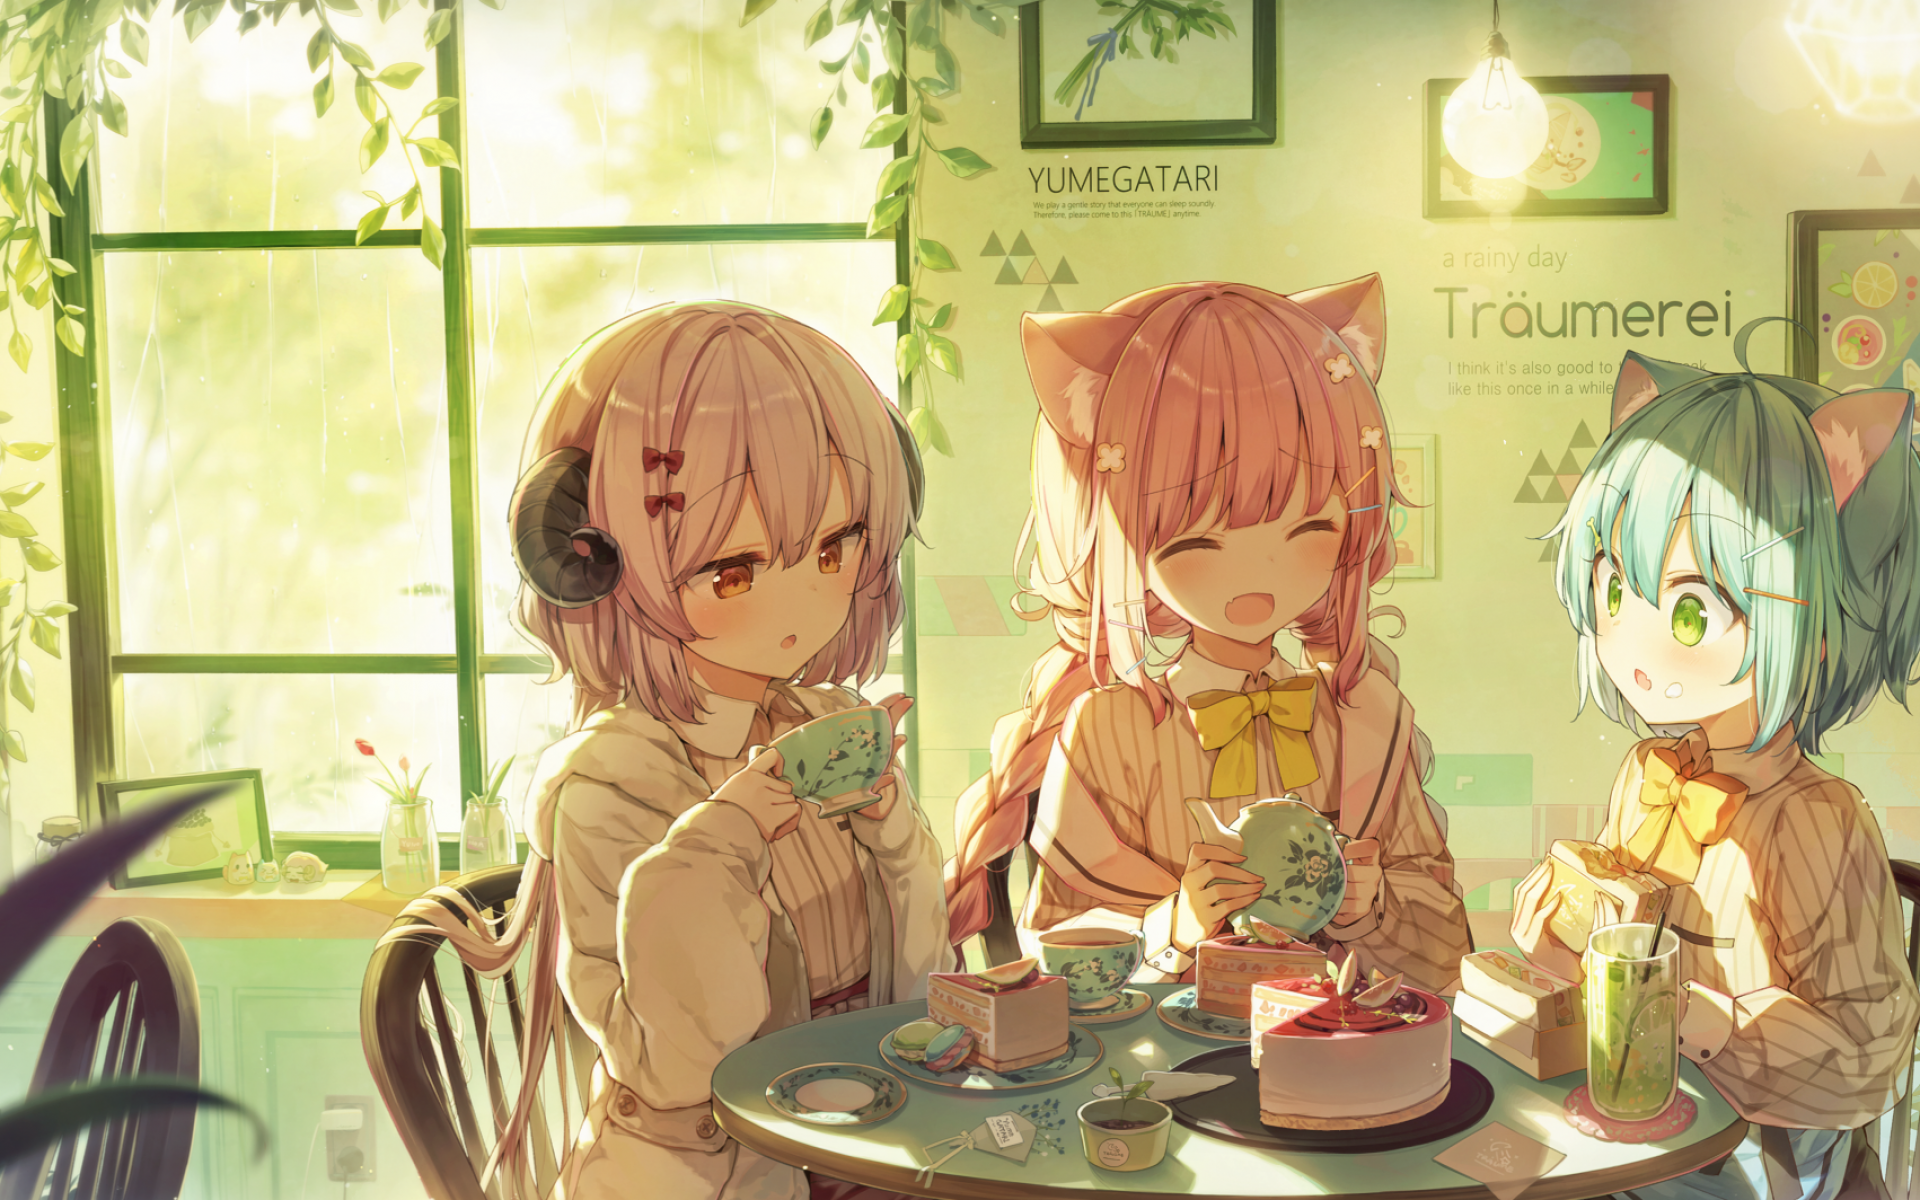 Download 1920x1200 Anime Girls, Cafe .wallpapermaiden.com